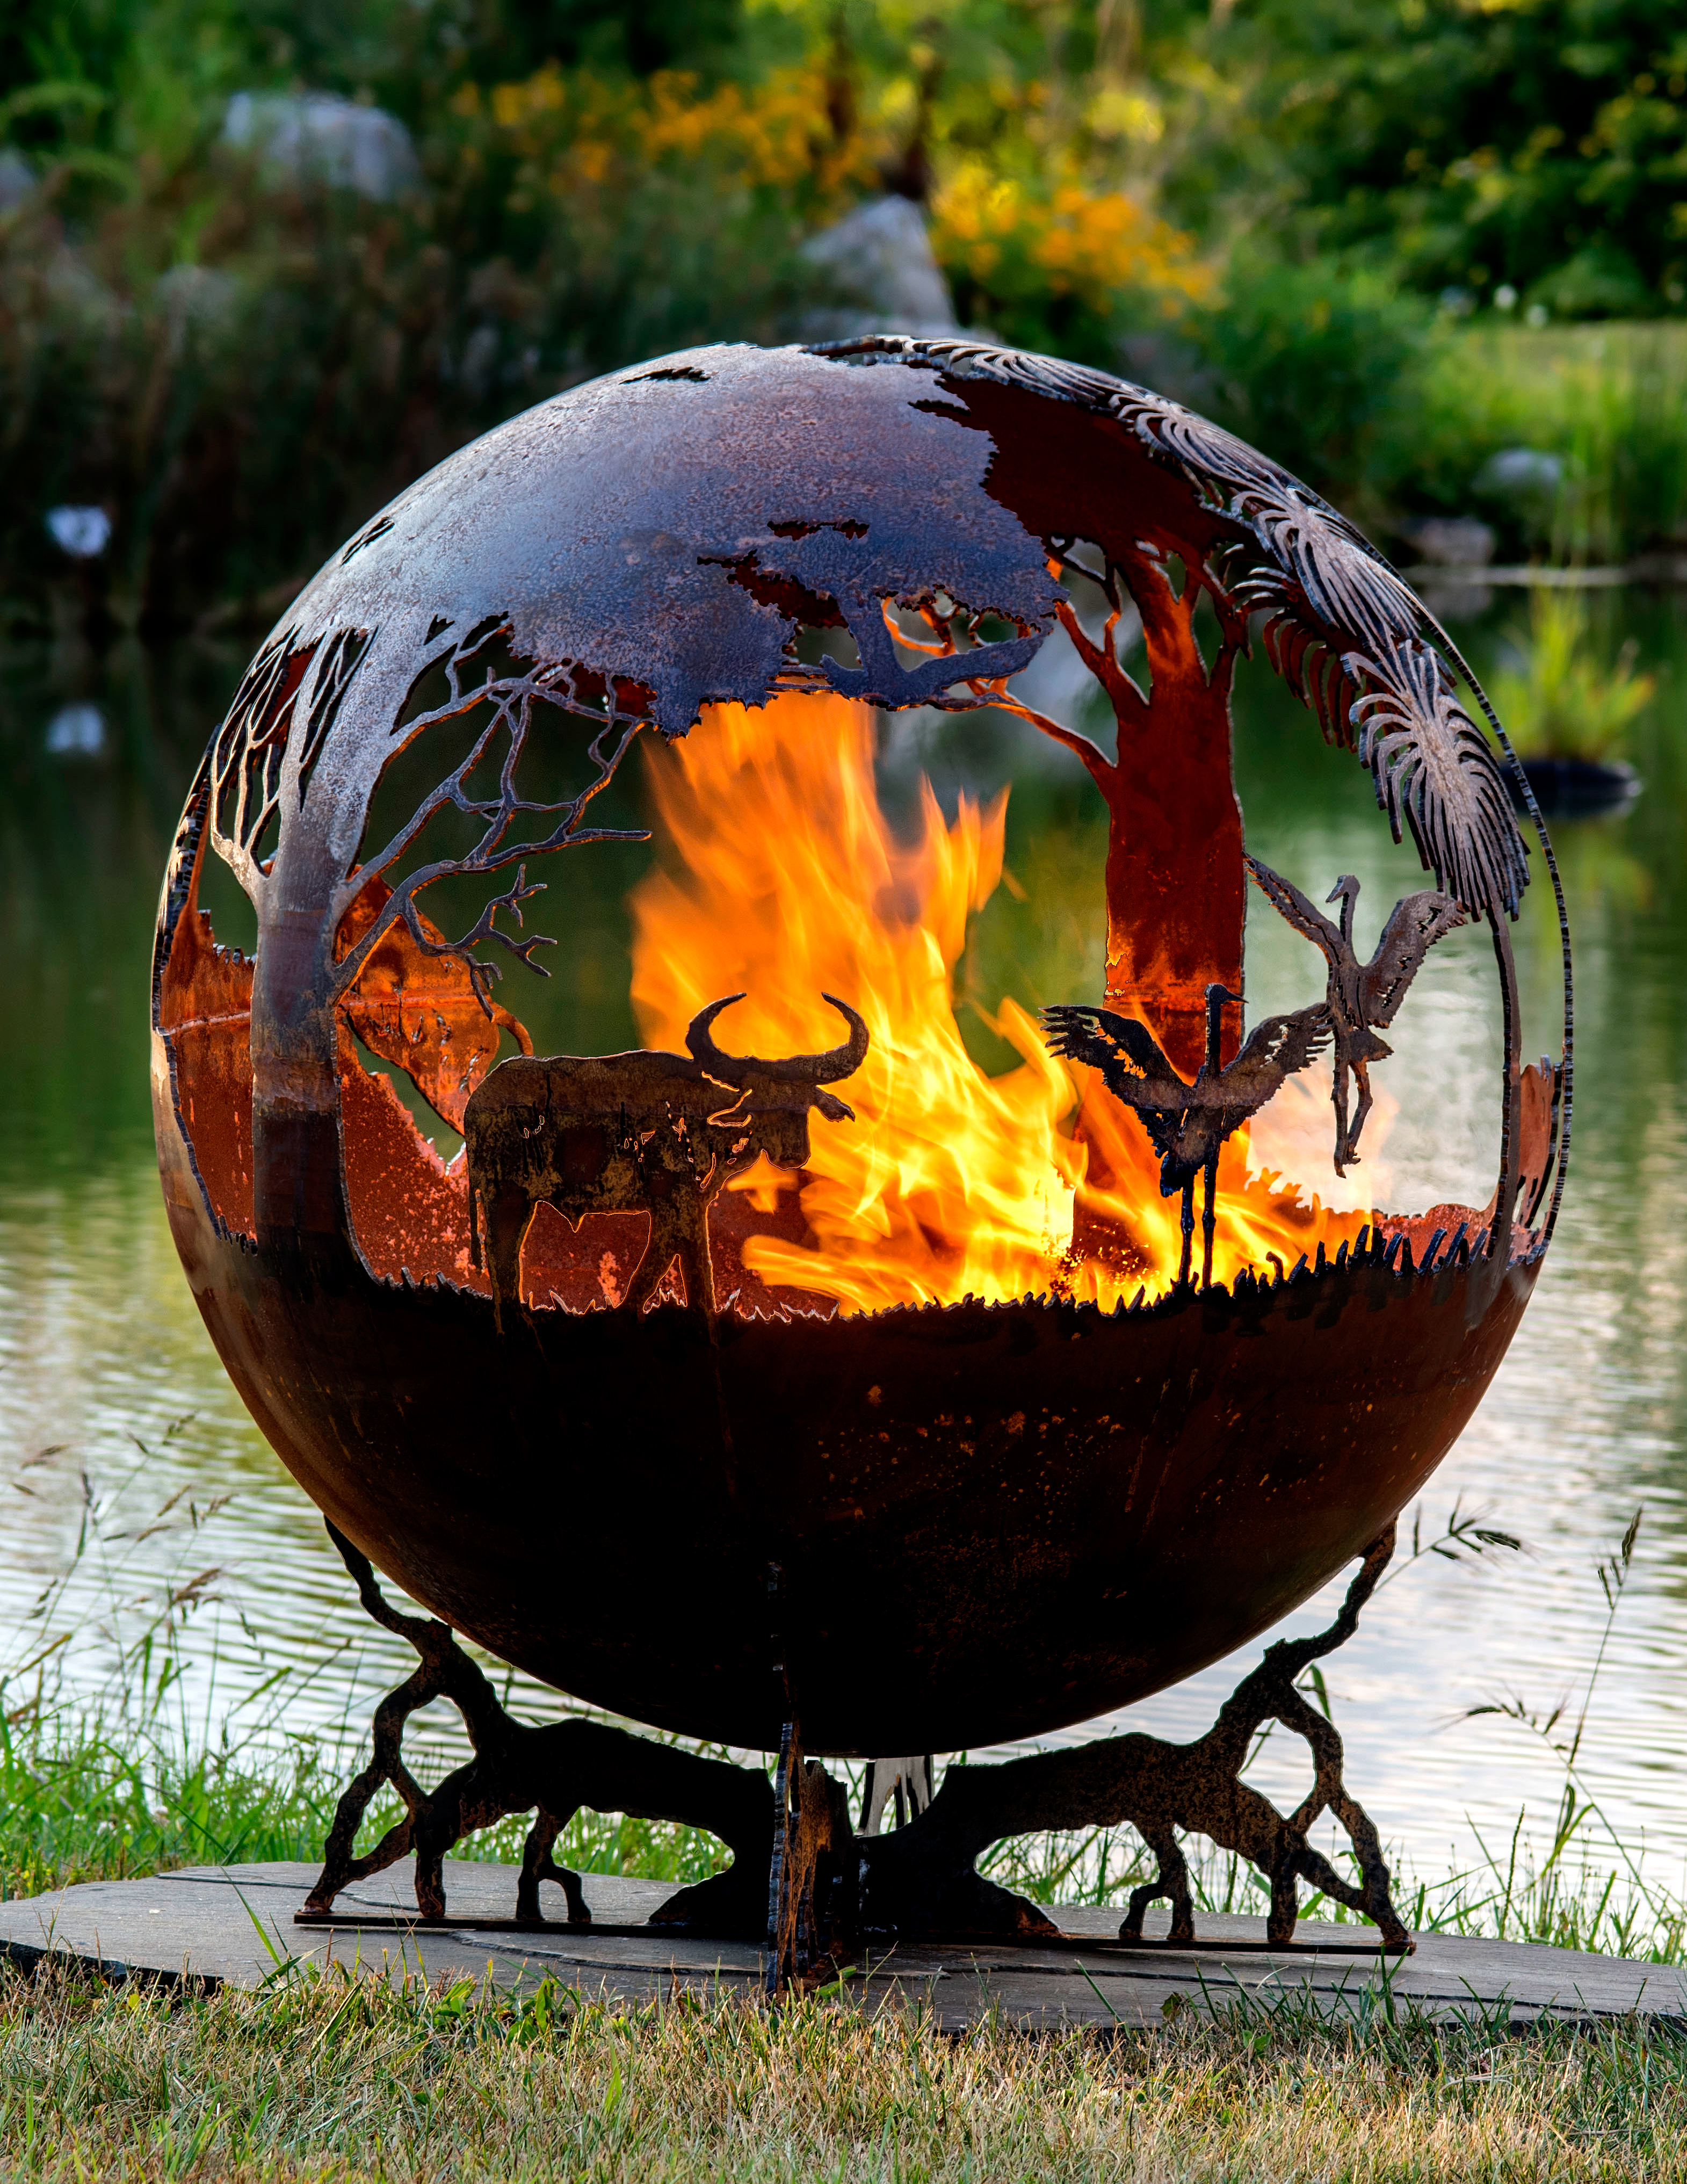 Outback - Australia Fire Pit Sphere | The Fire Pit Gallery : The ...